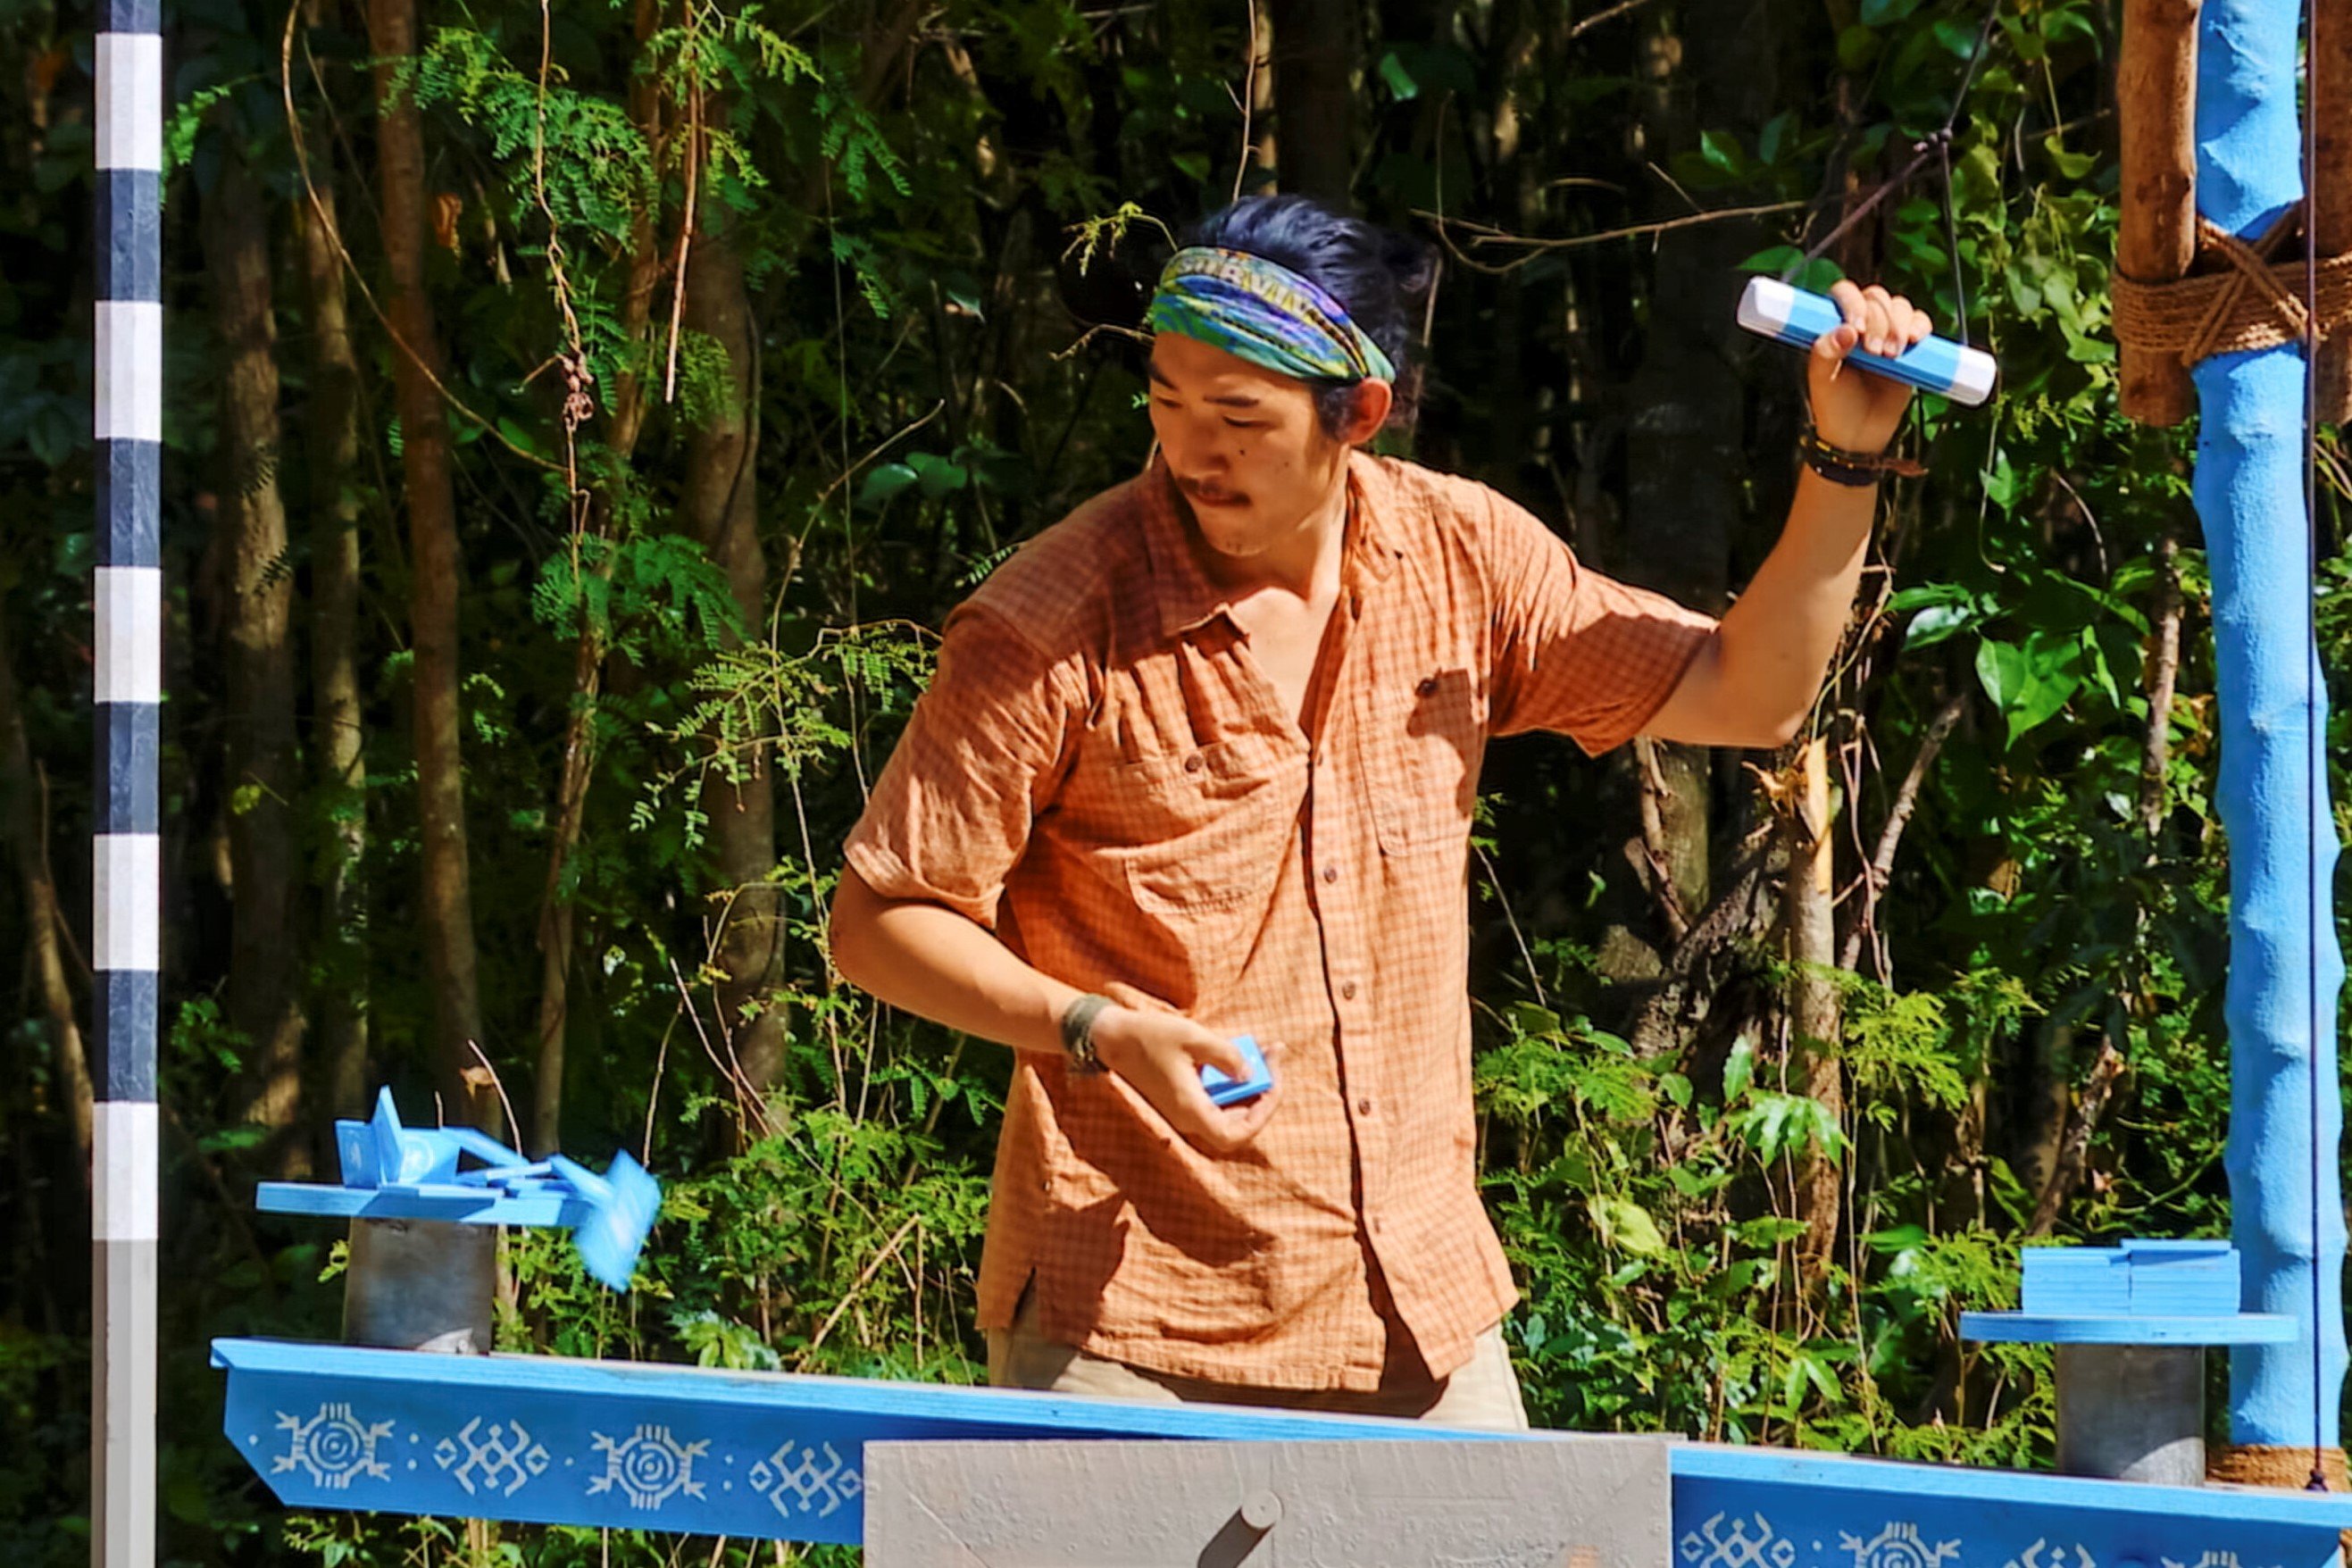 Owen Knight, who according to fans and spoilers, will make it to the Final Tribal Council in 'Survivor' Season 43 on CBS, competes in a challenge. Owen wears a short-sleeve orange button-up shirt, tan shorts, and his light blue 'Survivor' buff.